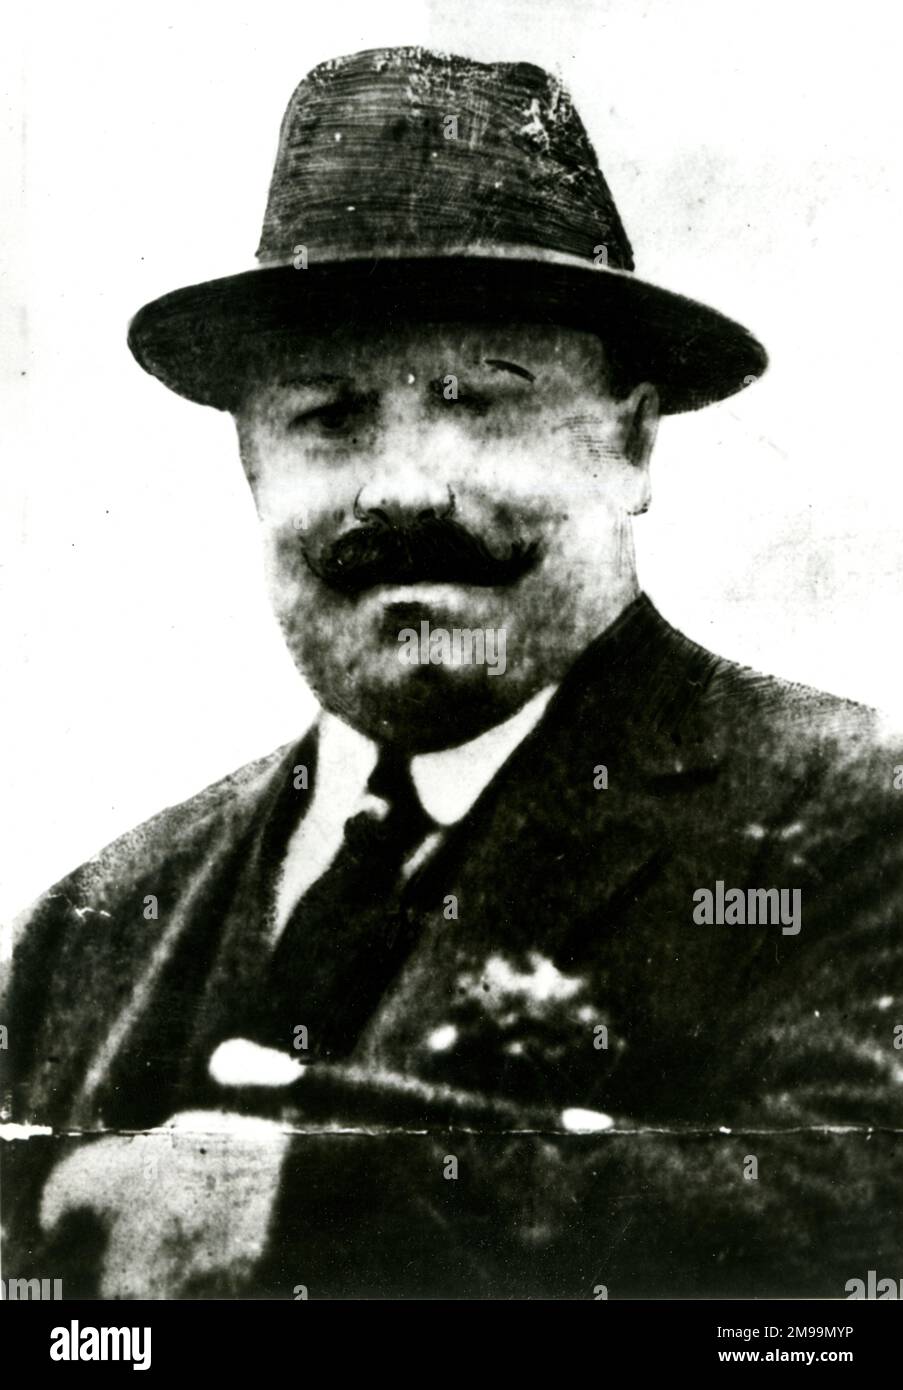 Louis Marie Joseph Voisin (1875-1918), a French butcher living in London who killed his Belgian girlfriend Emilliene Gerard during an argument in October 1917, and then dismembered her to conceal her identity. He was convicted at the Old Bailey in January 1918 and executed at Pentonville Prison in March. Stock Photo